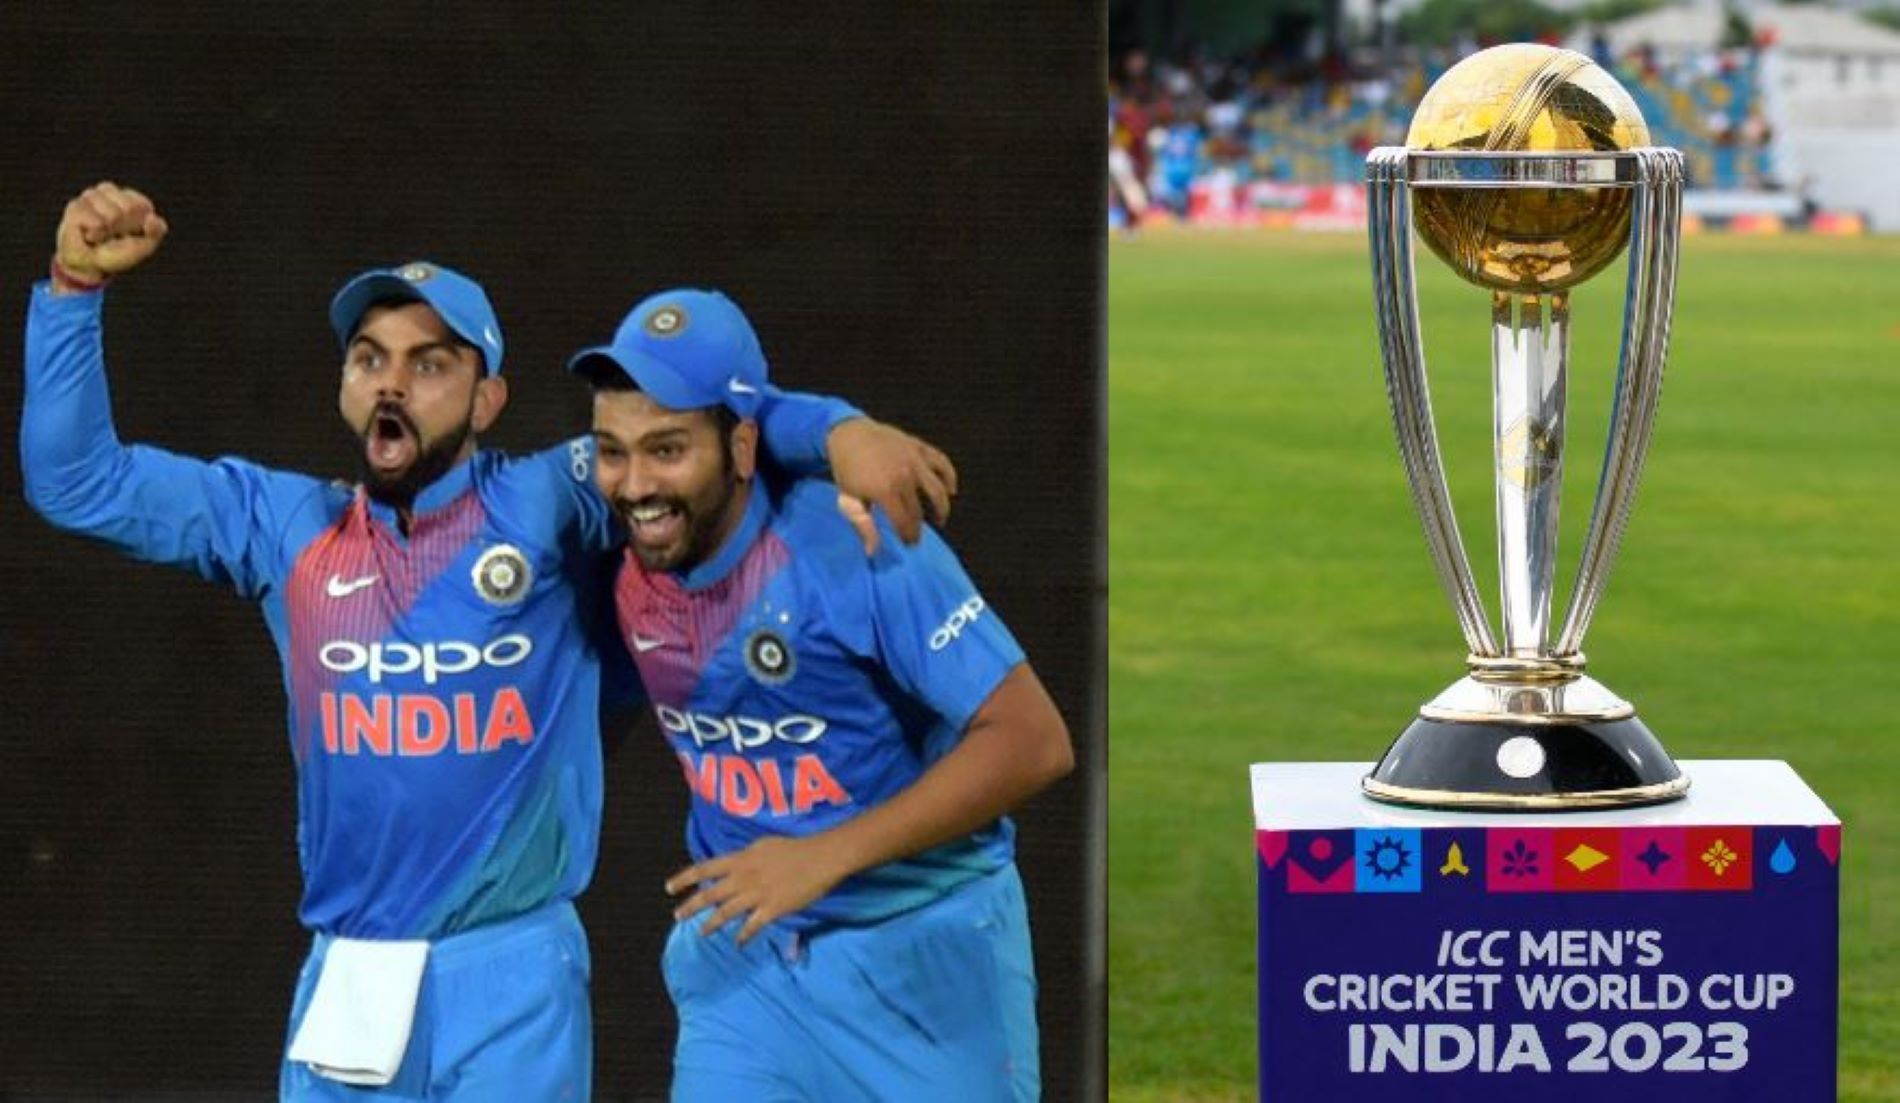 India will look to continue the trend of home teams winning the World Cup since 2011